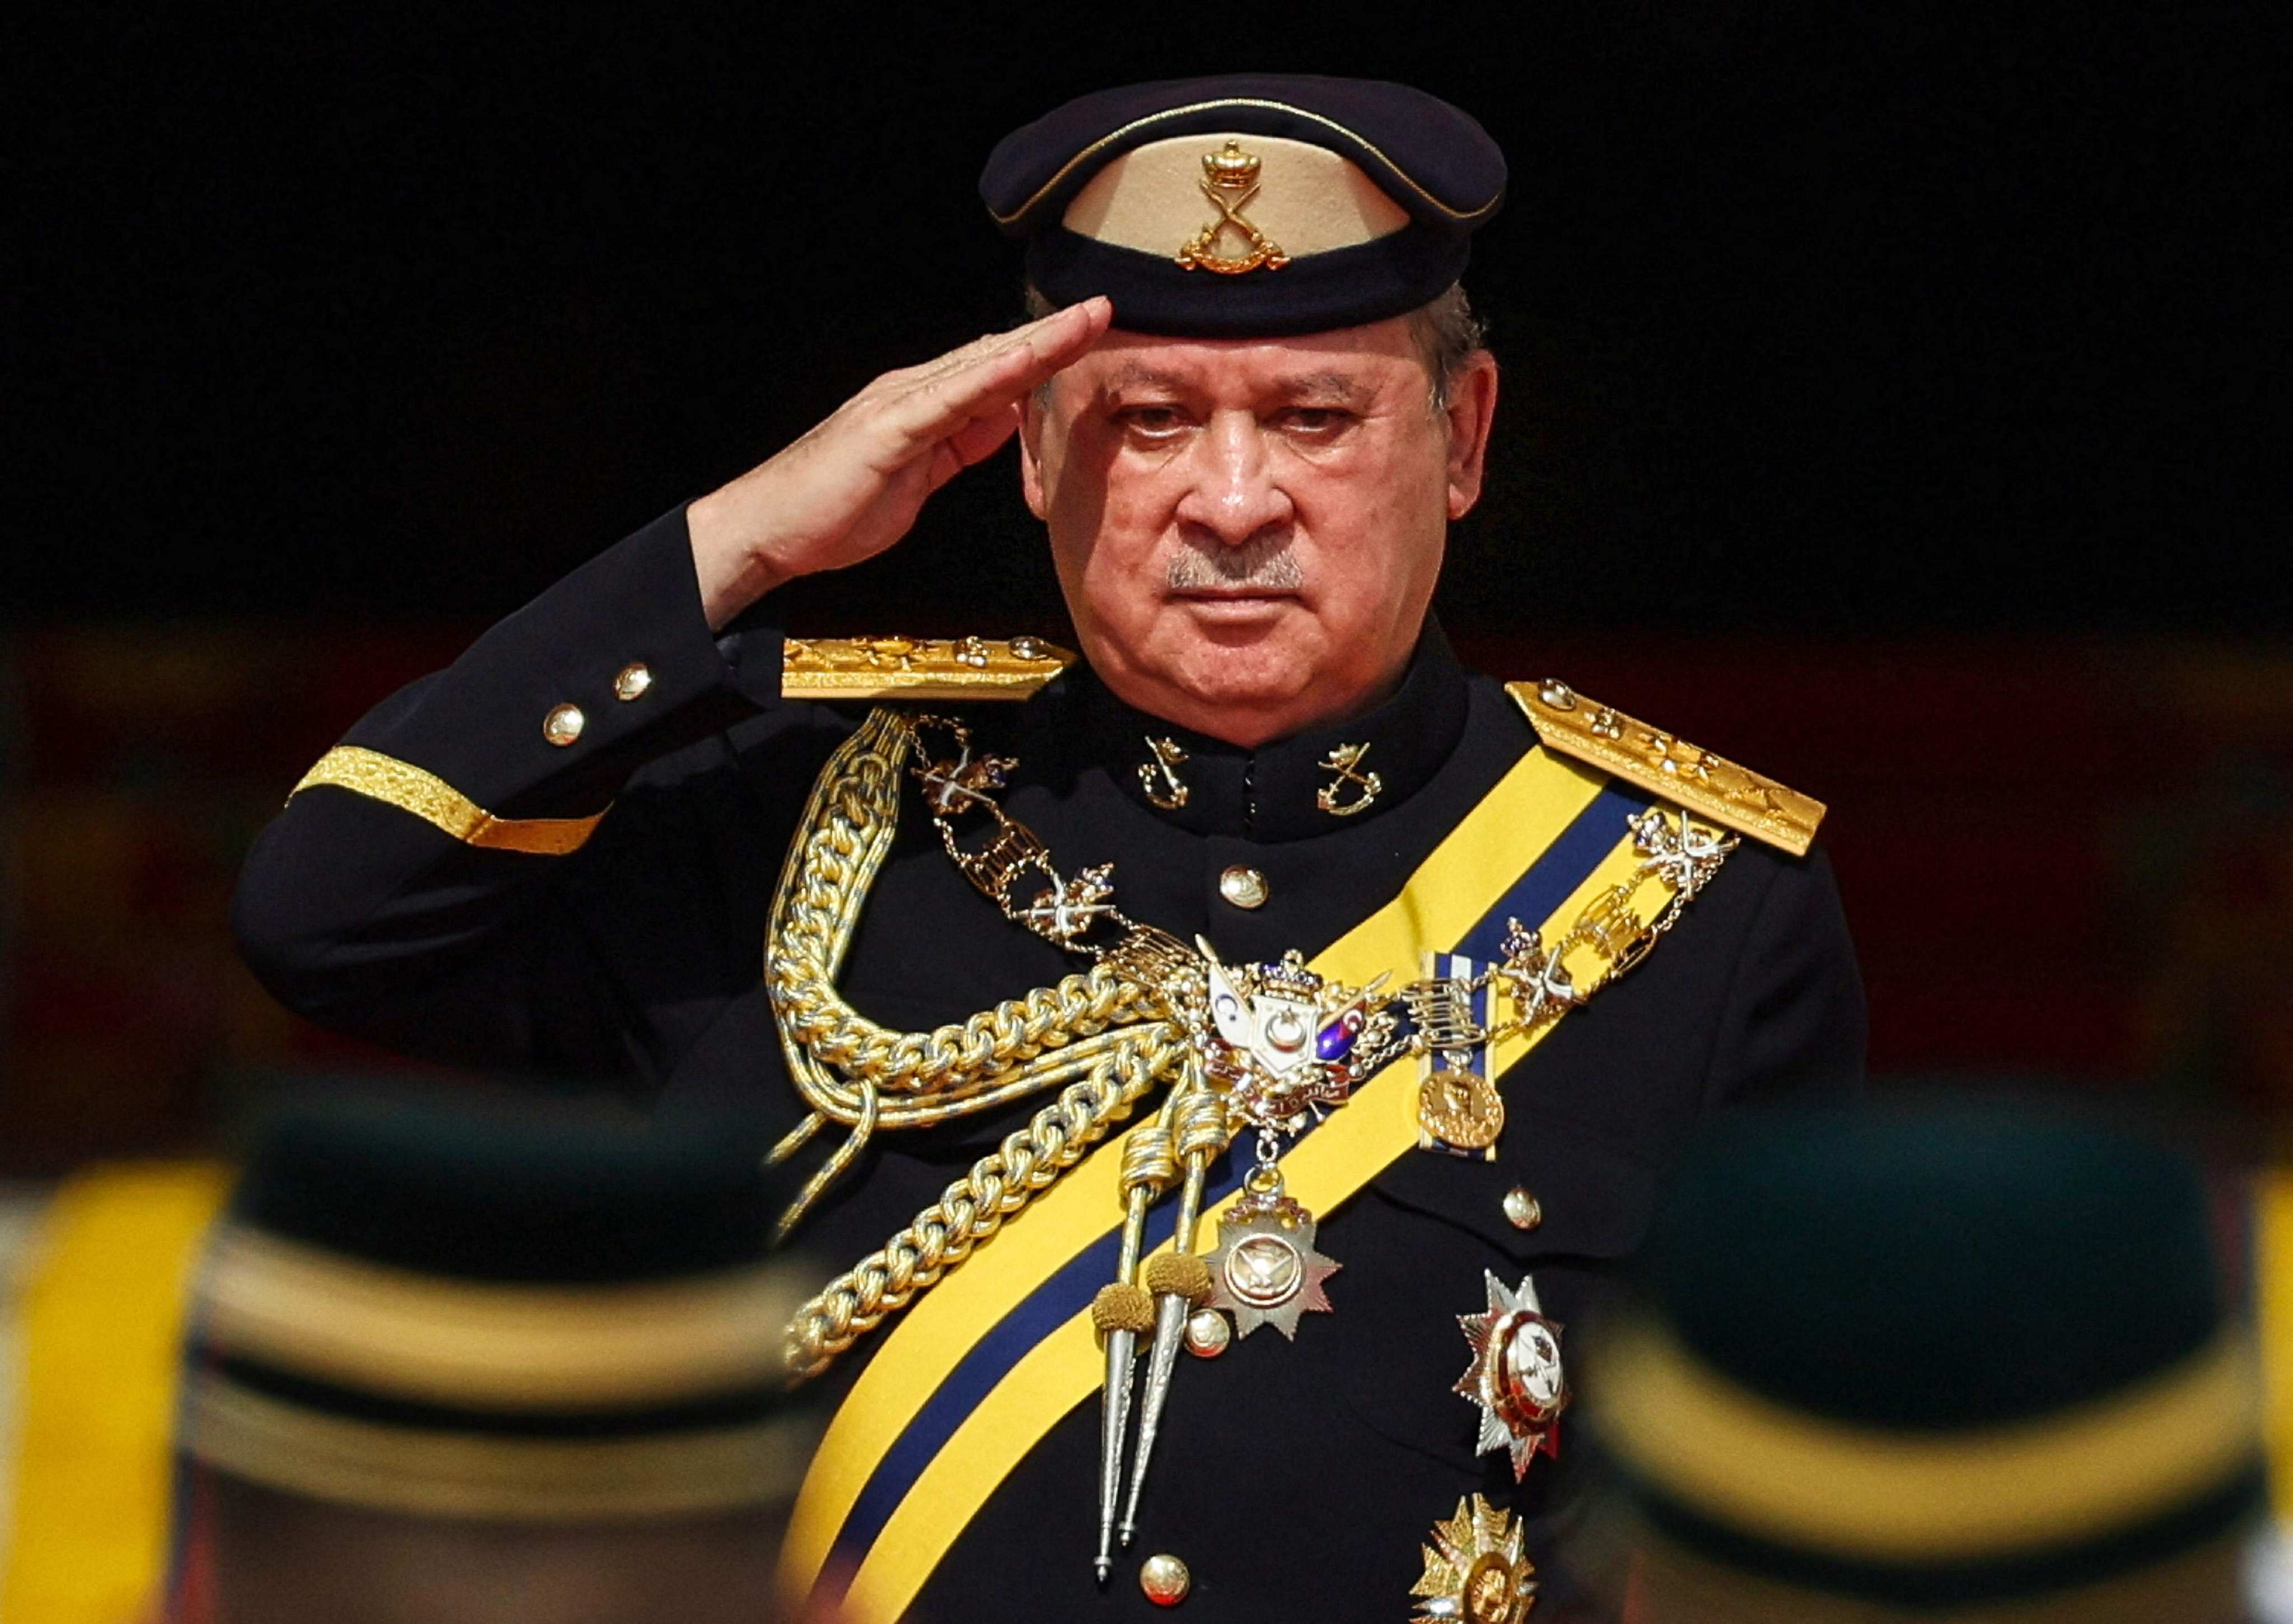 King of Malaysia Sultan Ibrahim Iskandar salutes the guard of honour during a welcoming ceremony at the National Palace in Kuala Lumpur, on January 31, 2024. Malaysia installed an outspoken motorcycle-riding king on January 31, 2024 in an elaborate traditional ceremony steeped in centuries of tradition, with the billionaire determined to play a key role in ensuring political stability. (Photo by HASNOOR HUSSAIN / POOL / AFP)